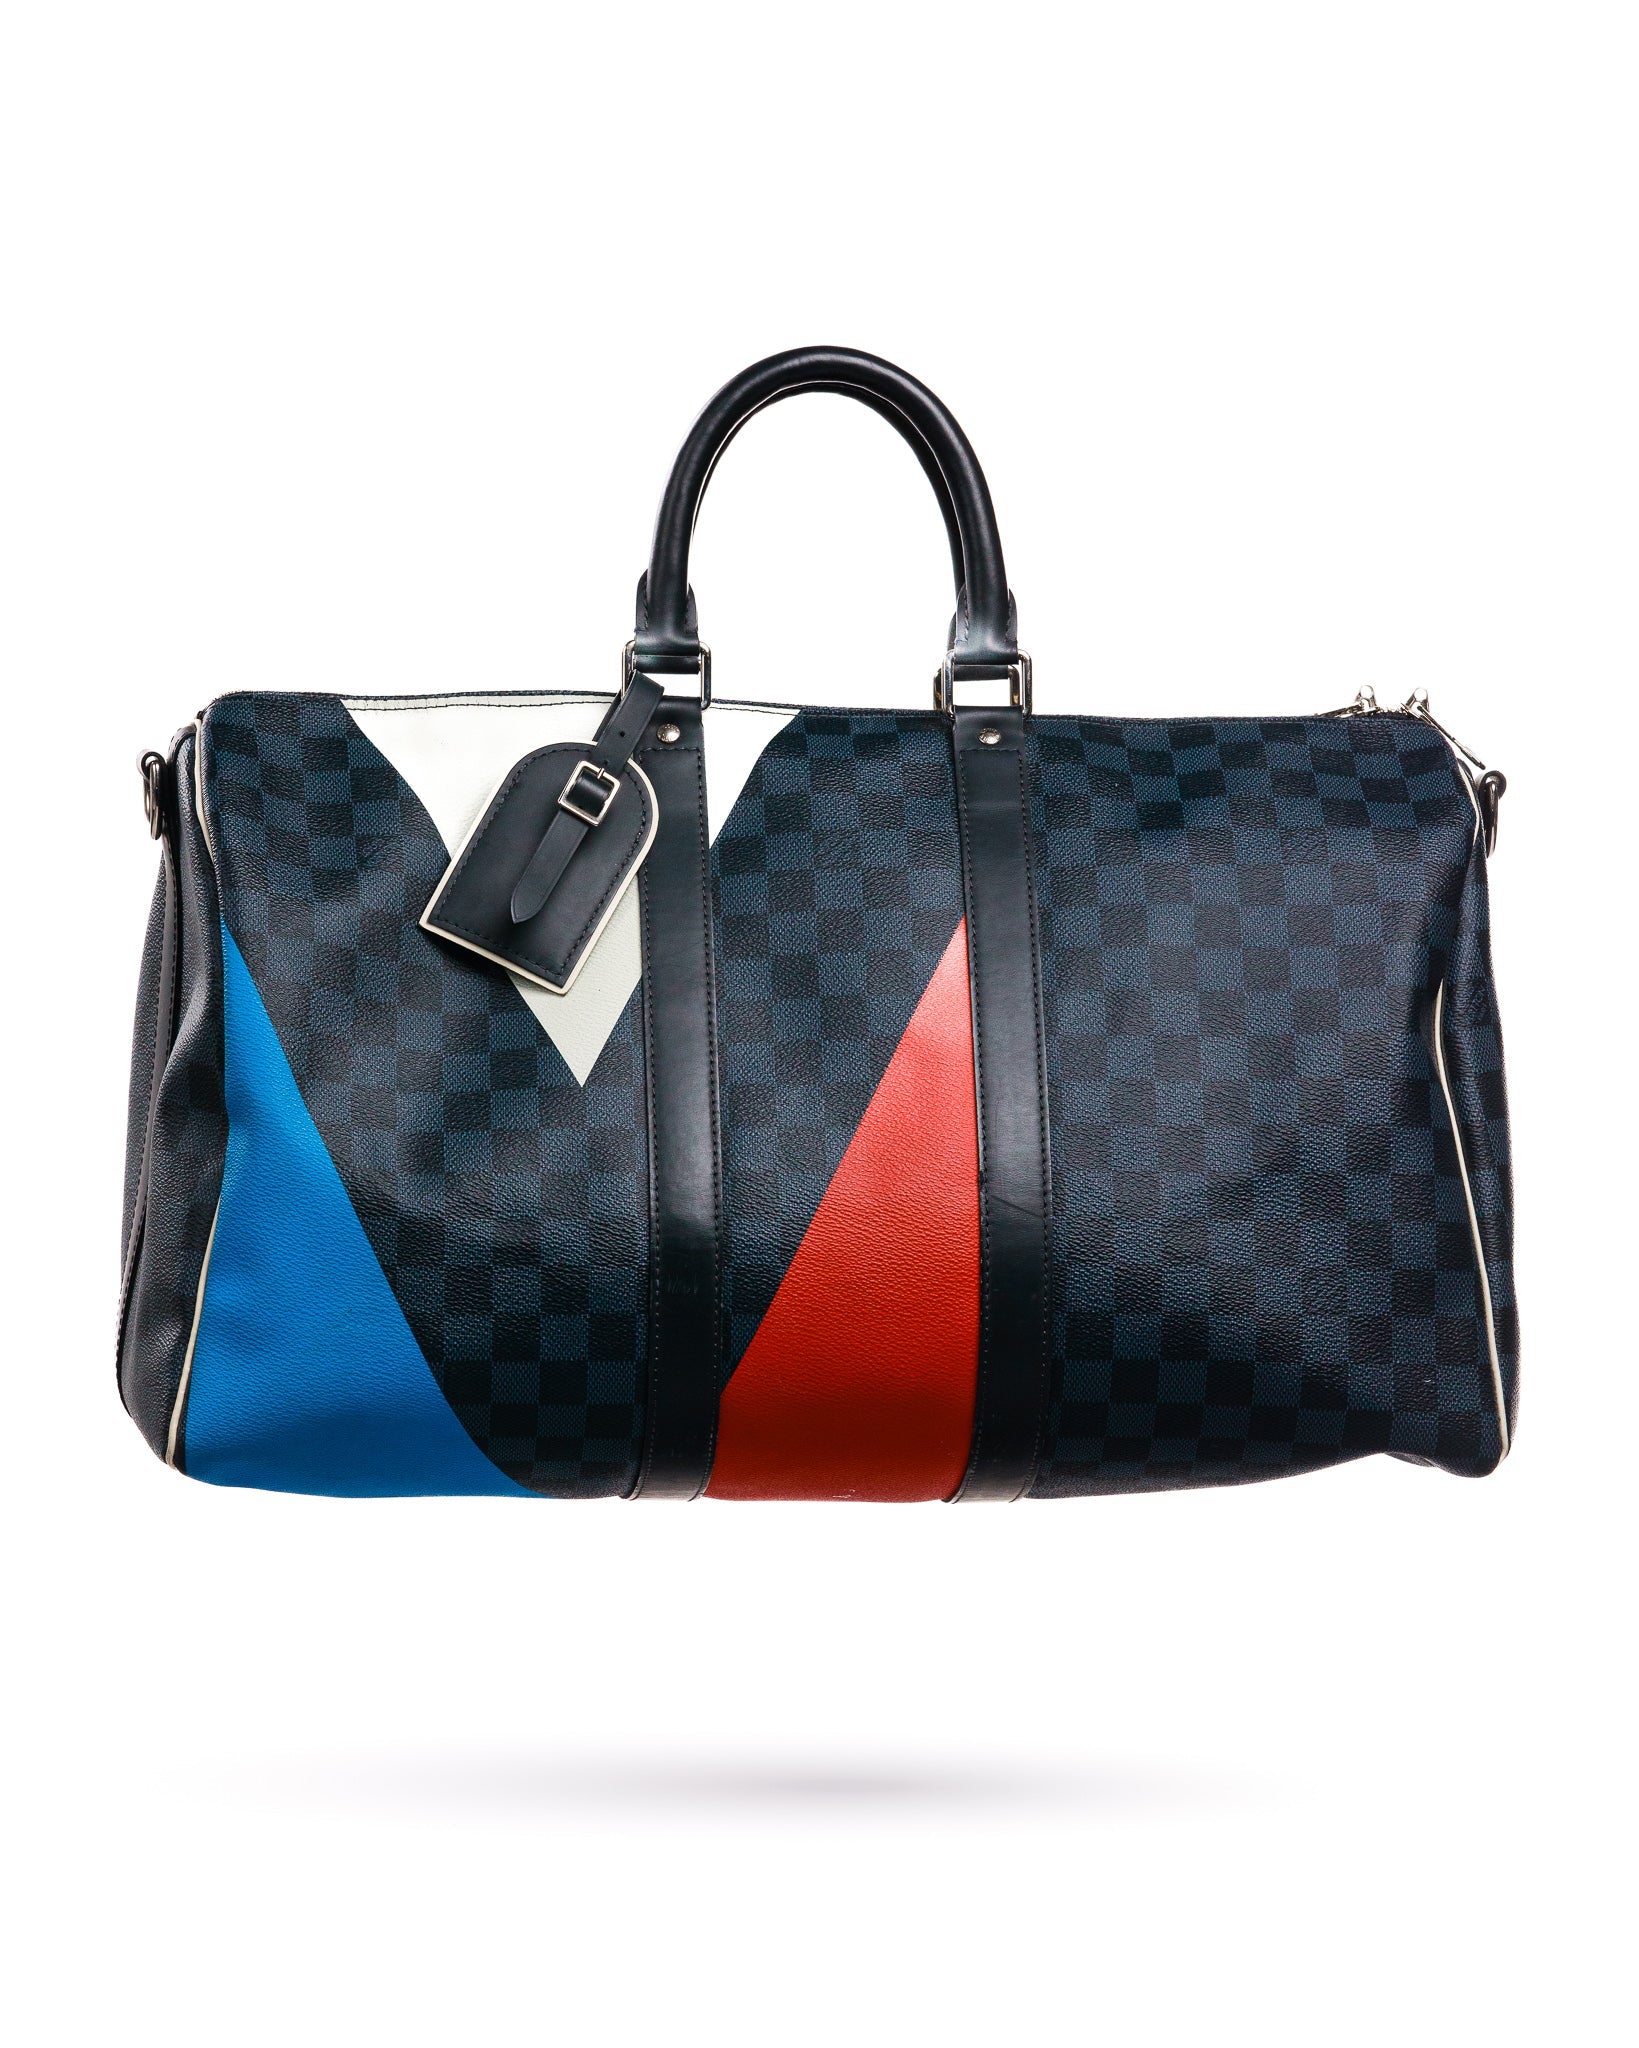 Louis Vuitton Keepall 45 Americas Cup 2017 Limited Edition Duffle